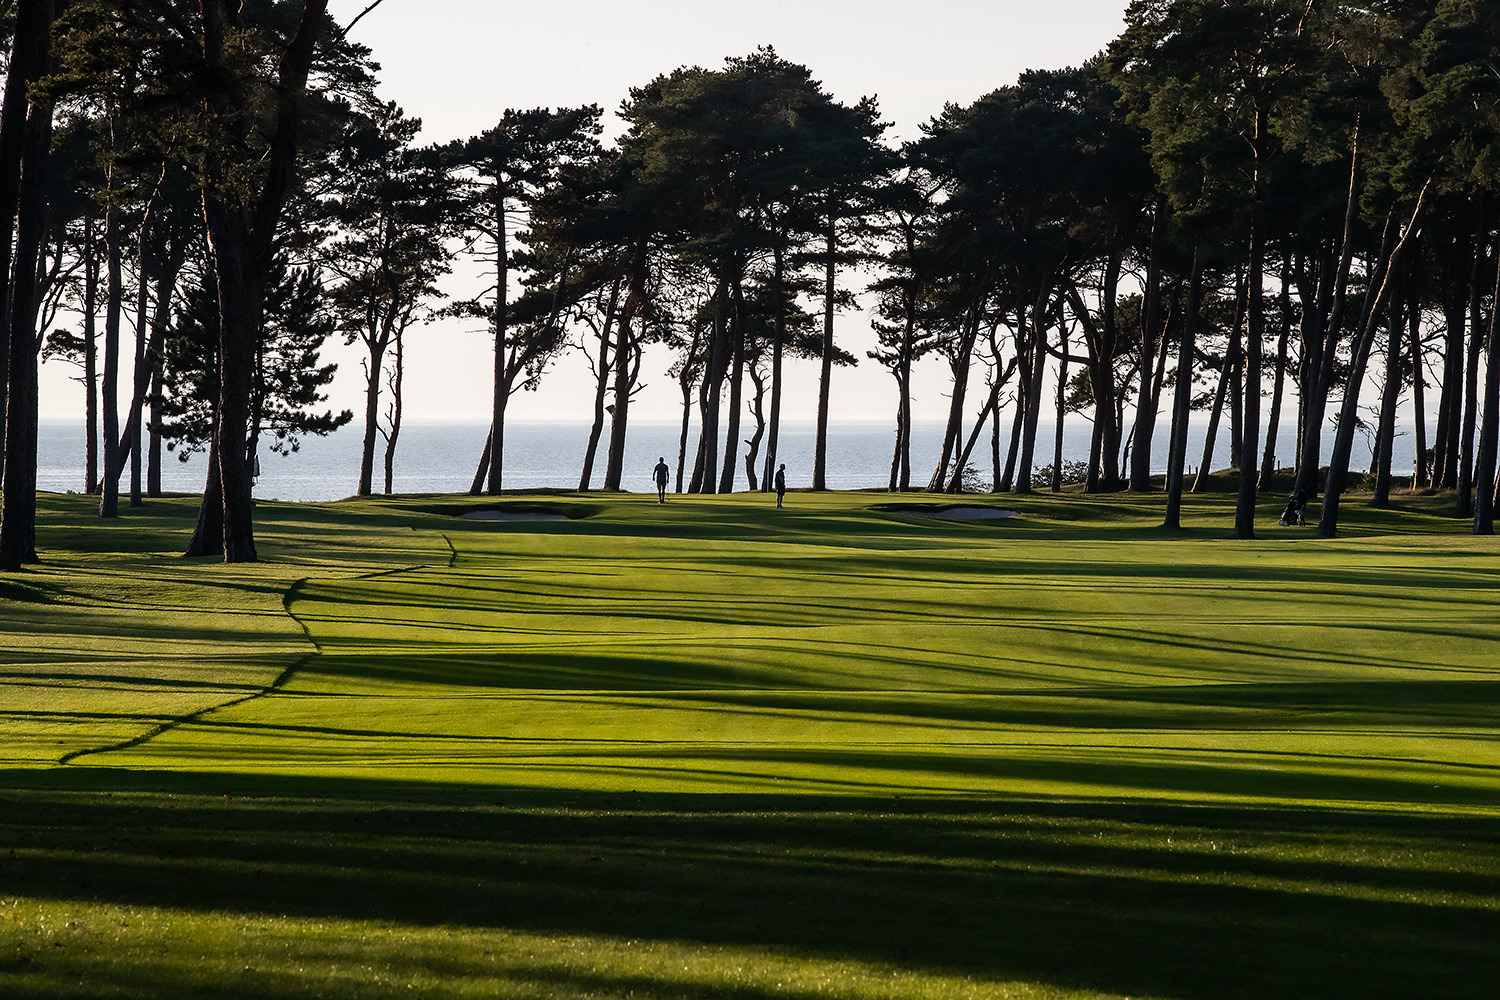 Golf course with lush green fairways, two players surrounded by trees, with the sea in the background.